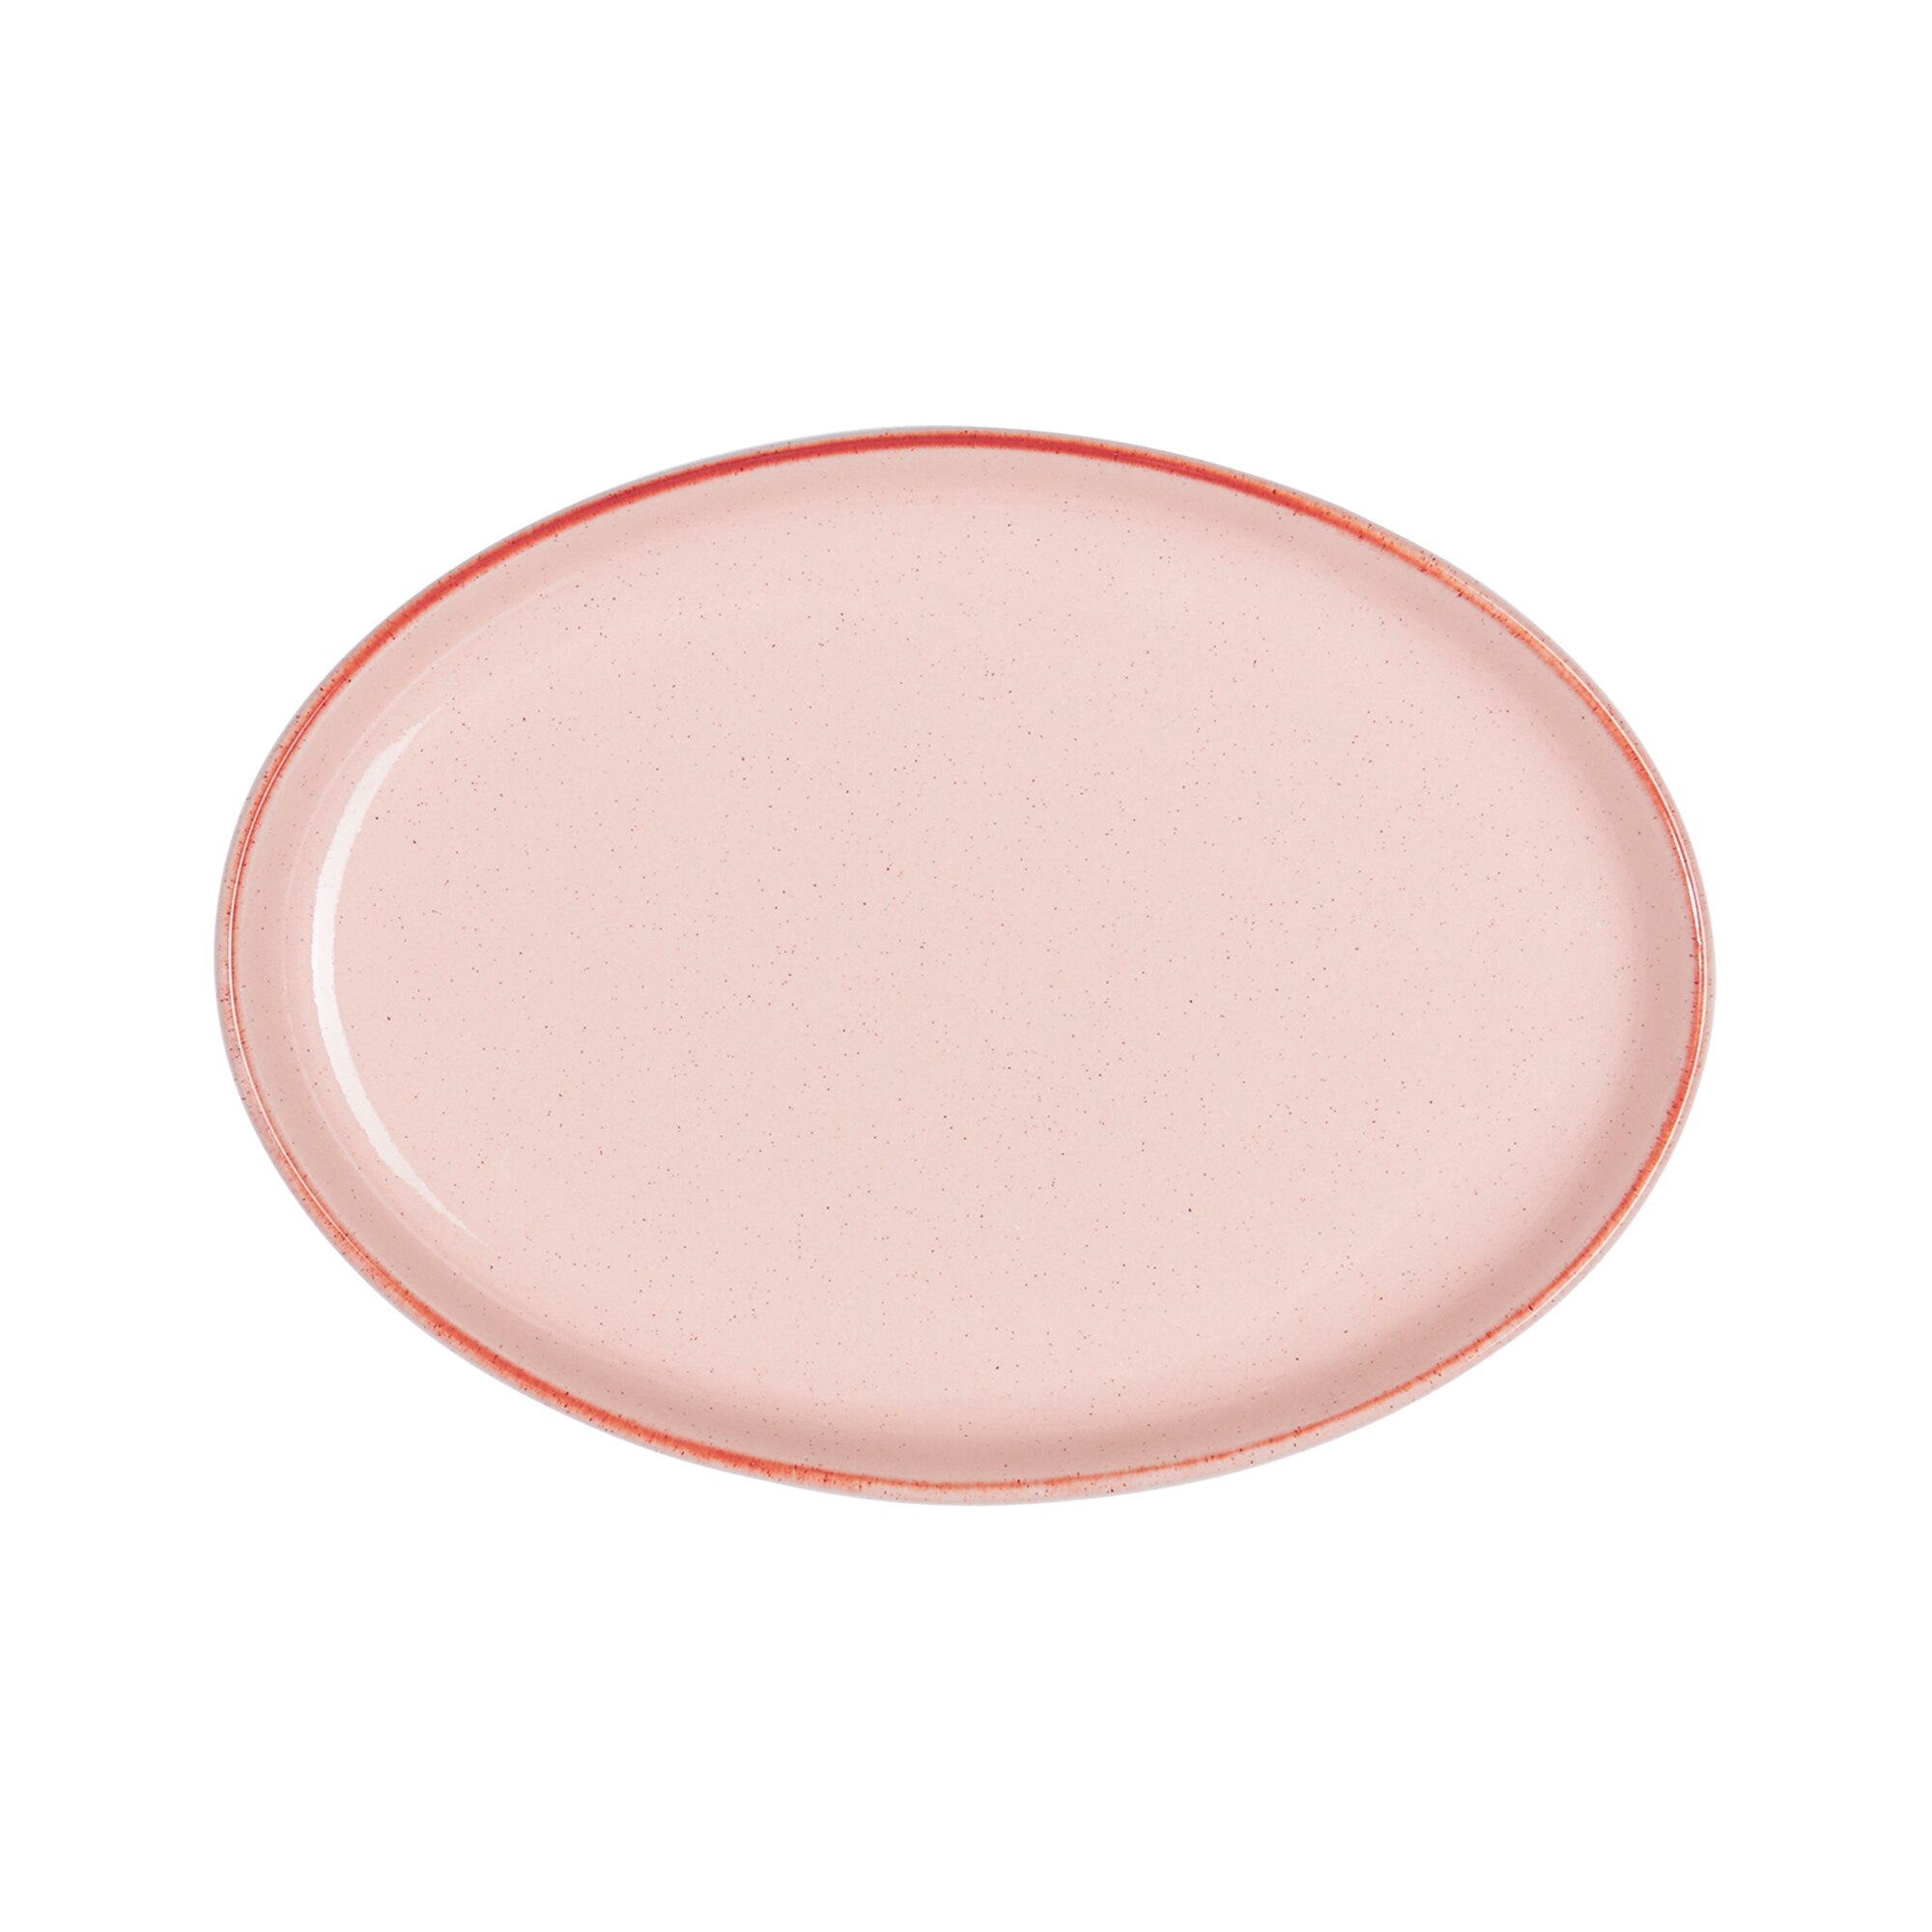 Heritage Piazza Small Oval Tray